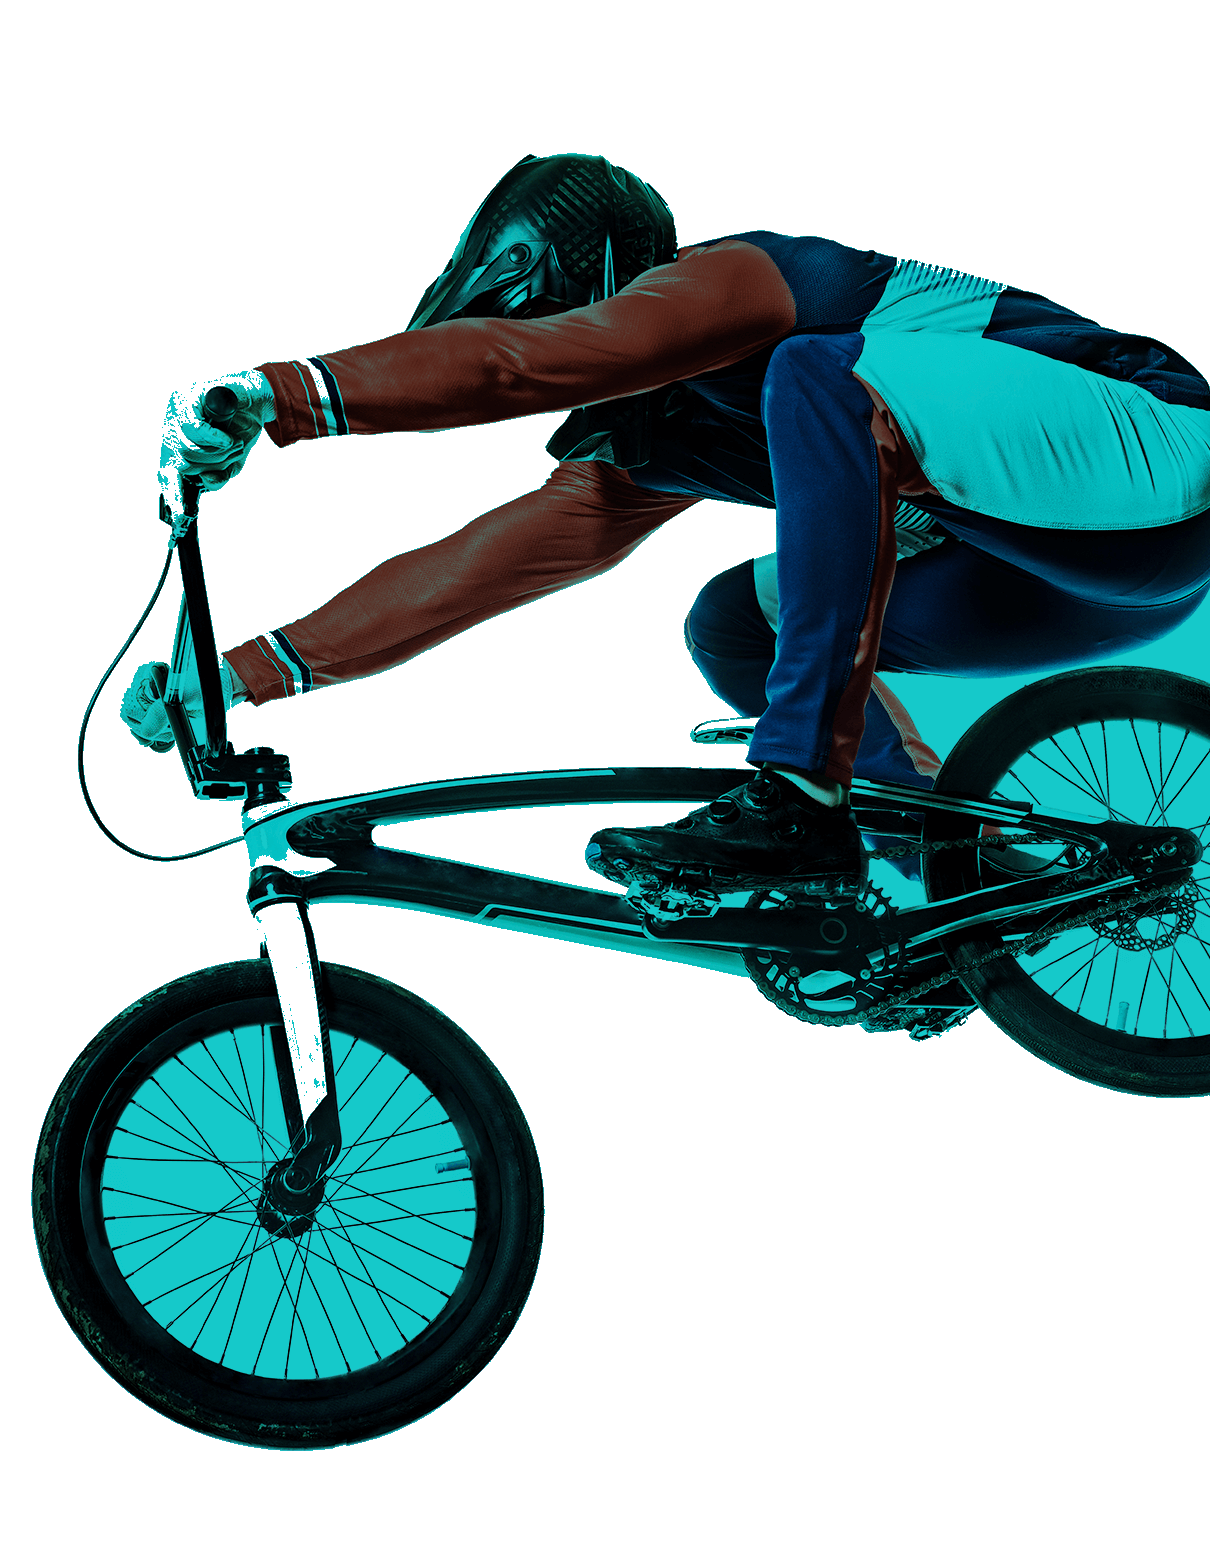 In the picture, a male cyclists drives a BMX. He is wearing a red, blue and white uniform, apart from the helmet.